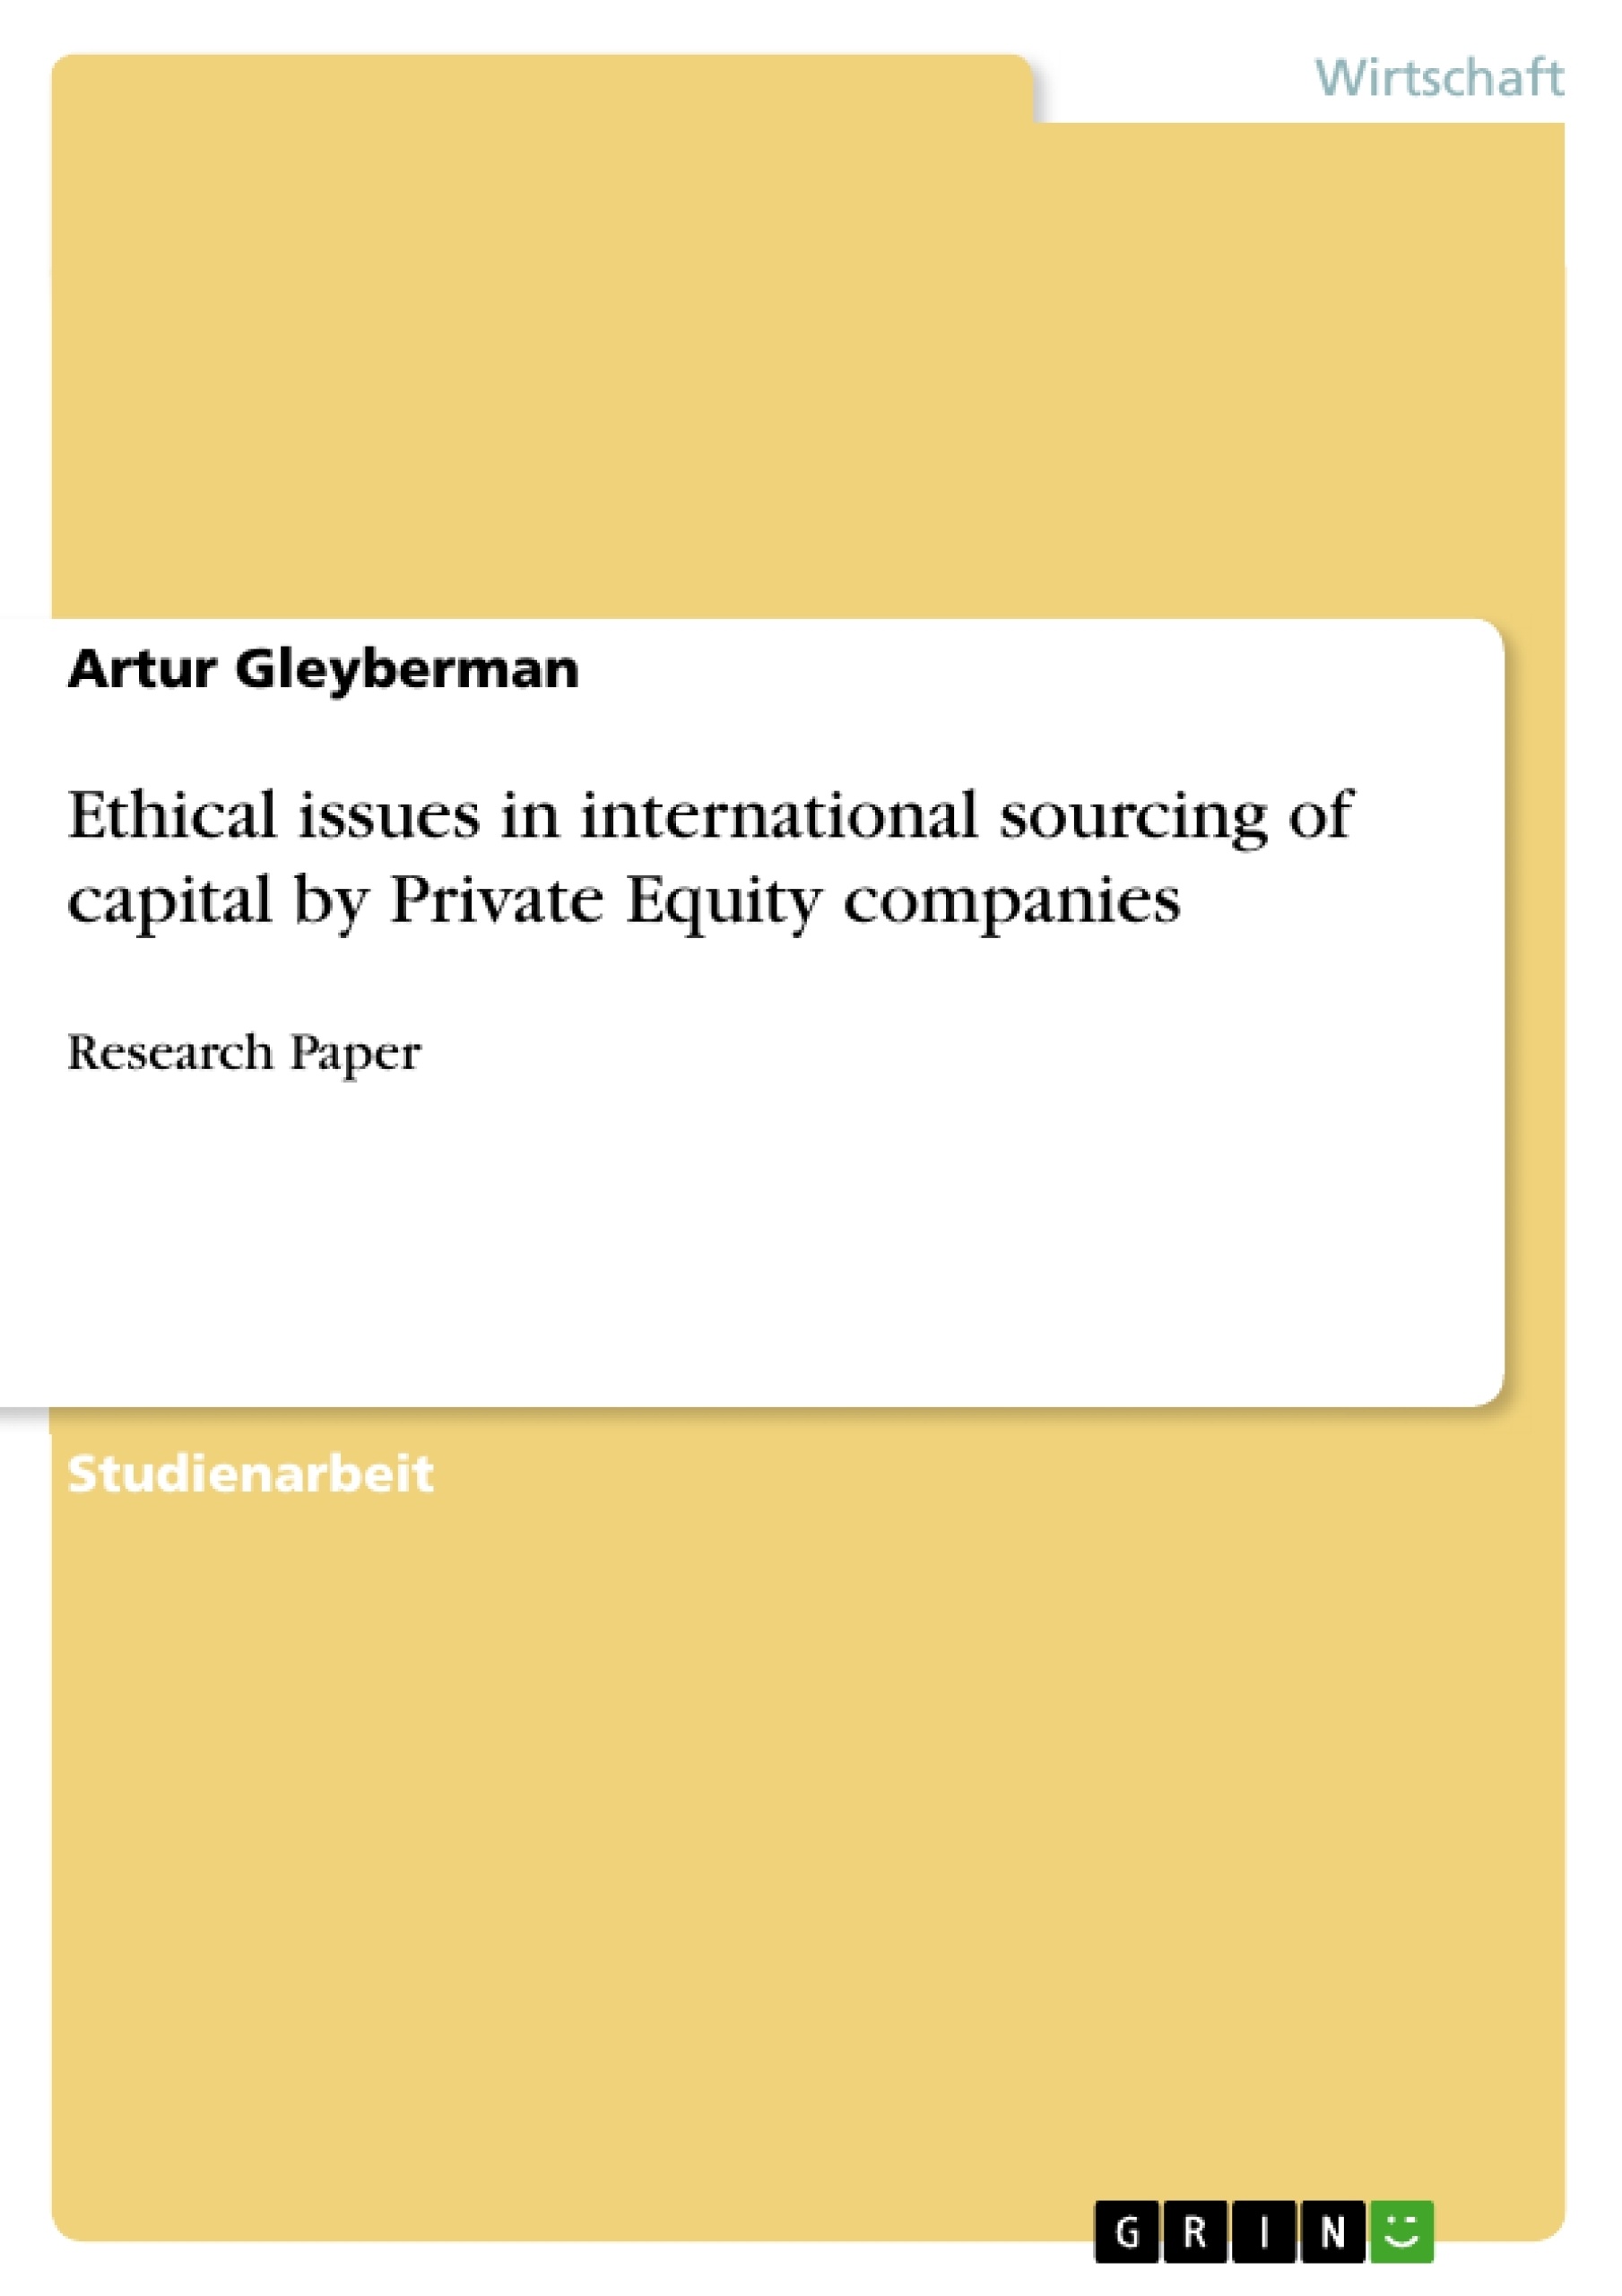 Título: Ethical issues in international sourcing of capital by Private Equity companies